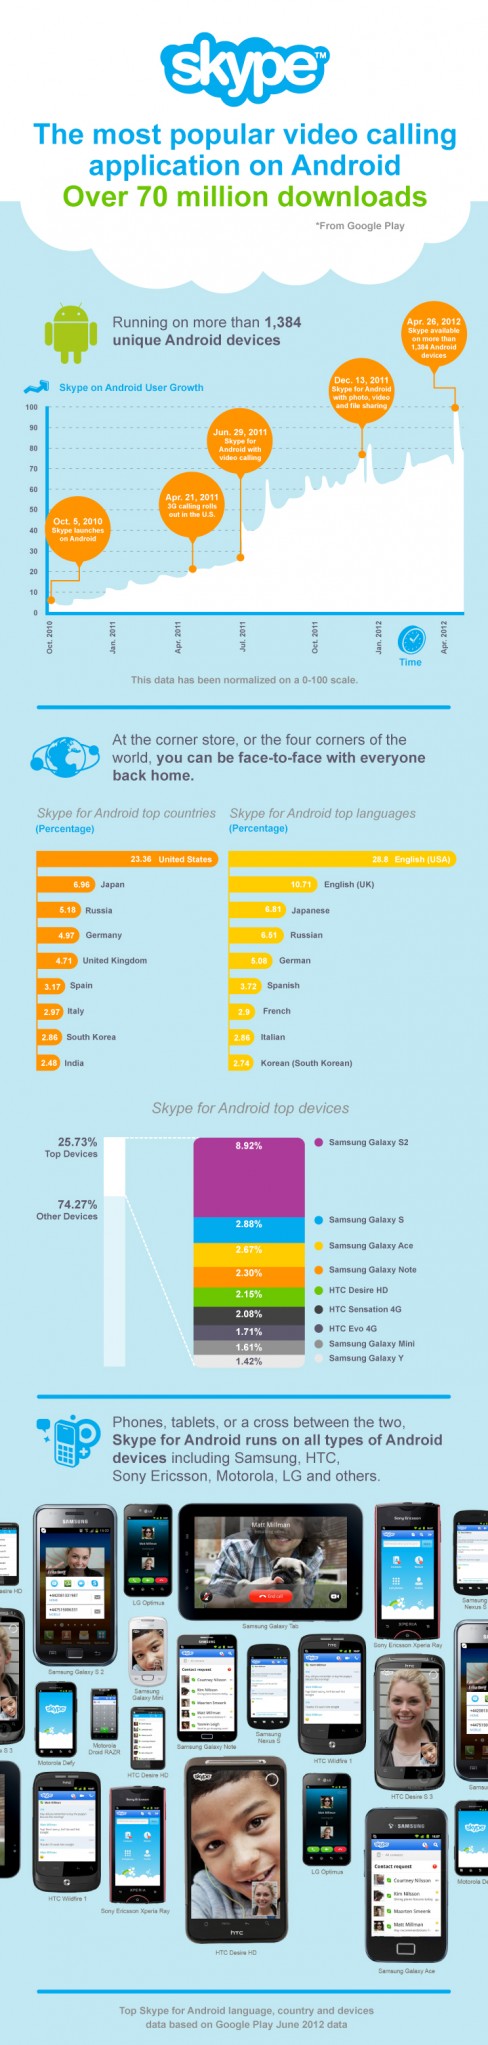 Skype for Android infographic, June 2012